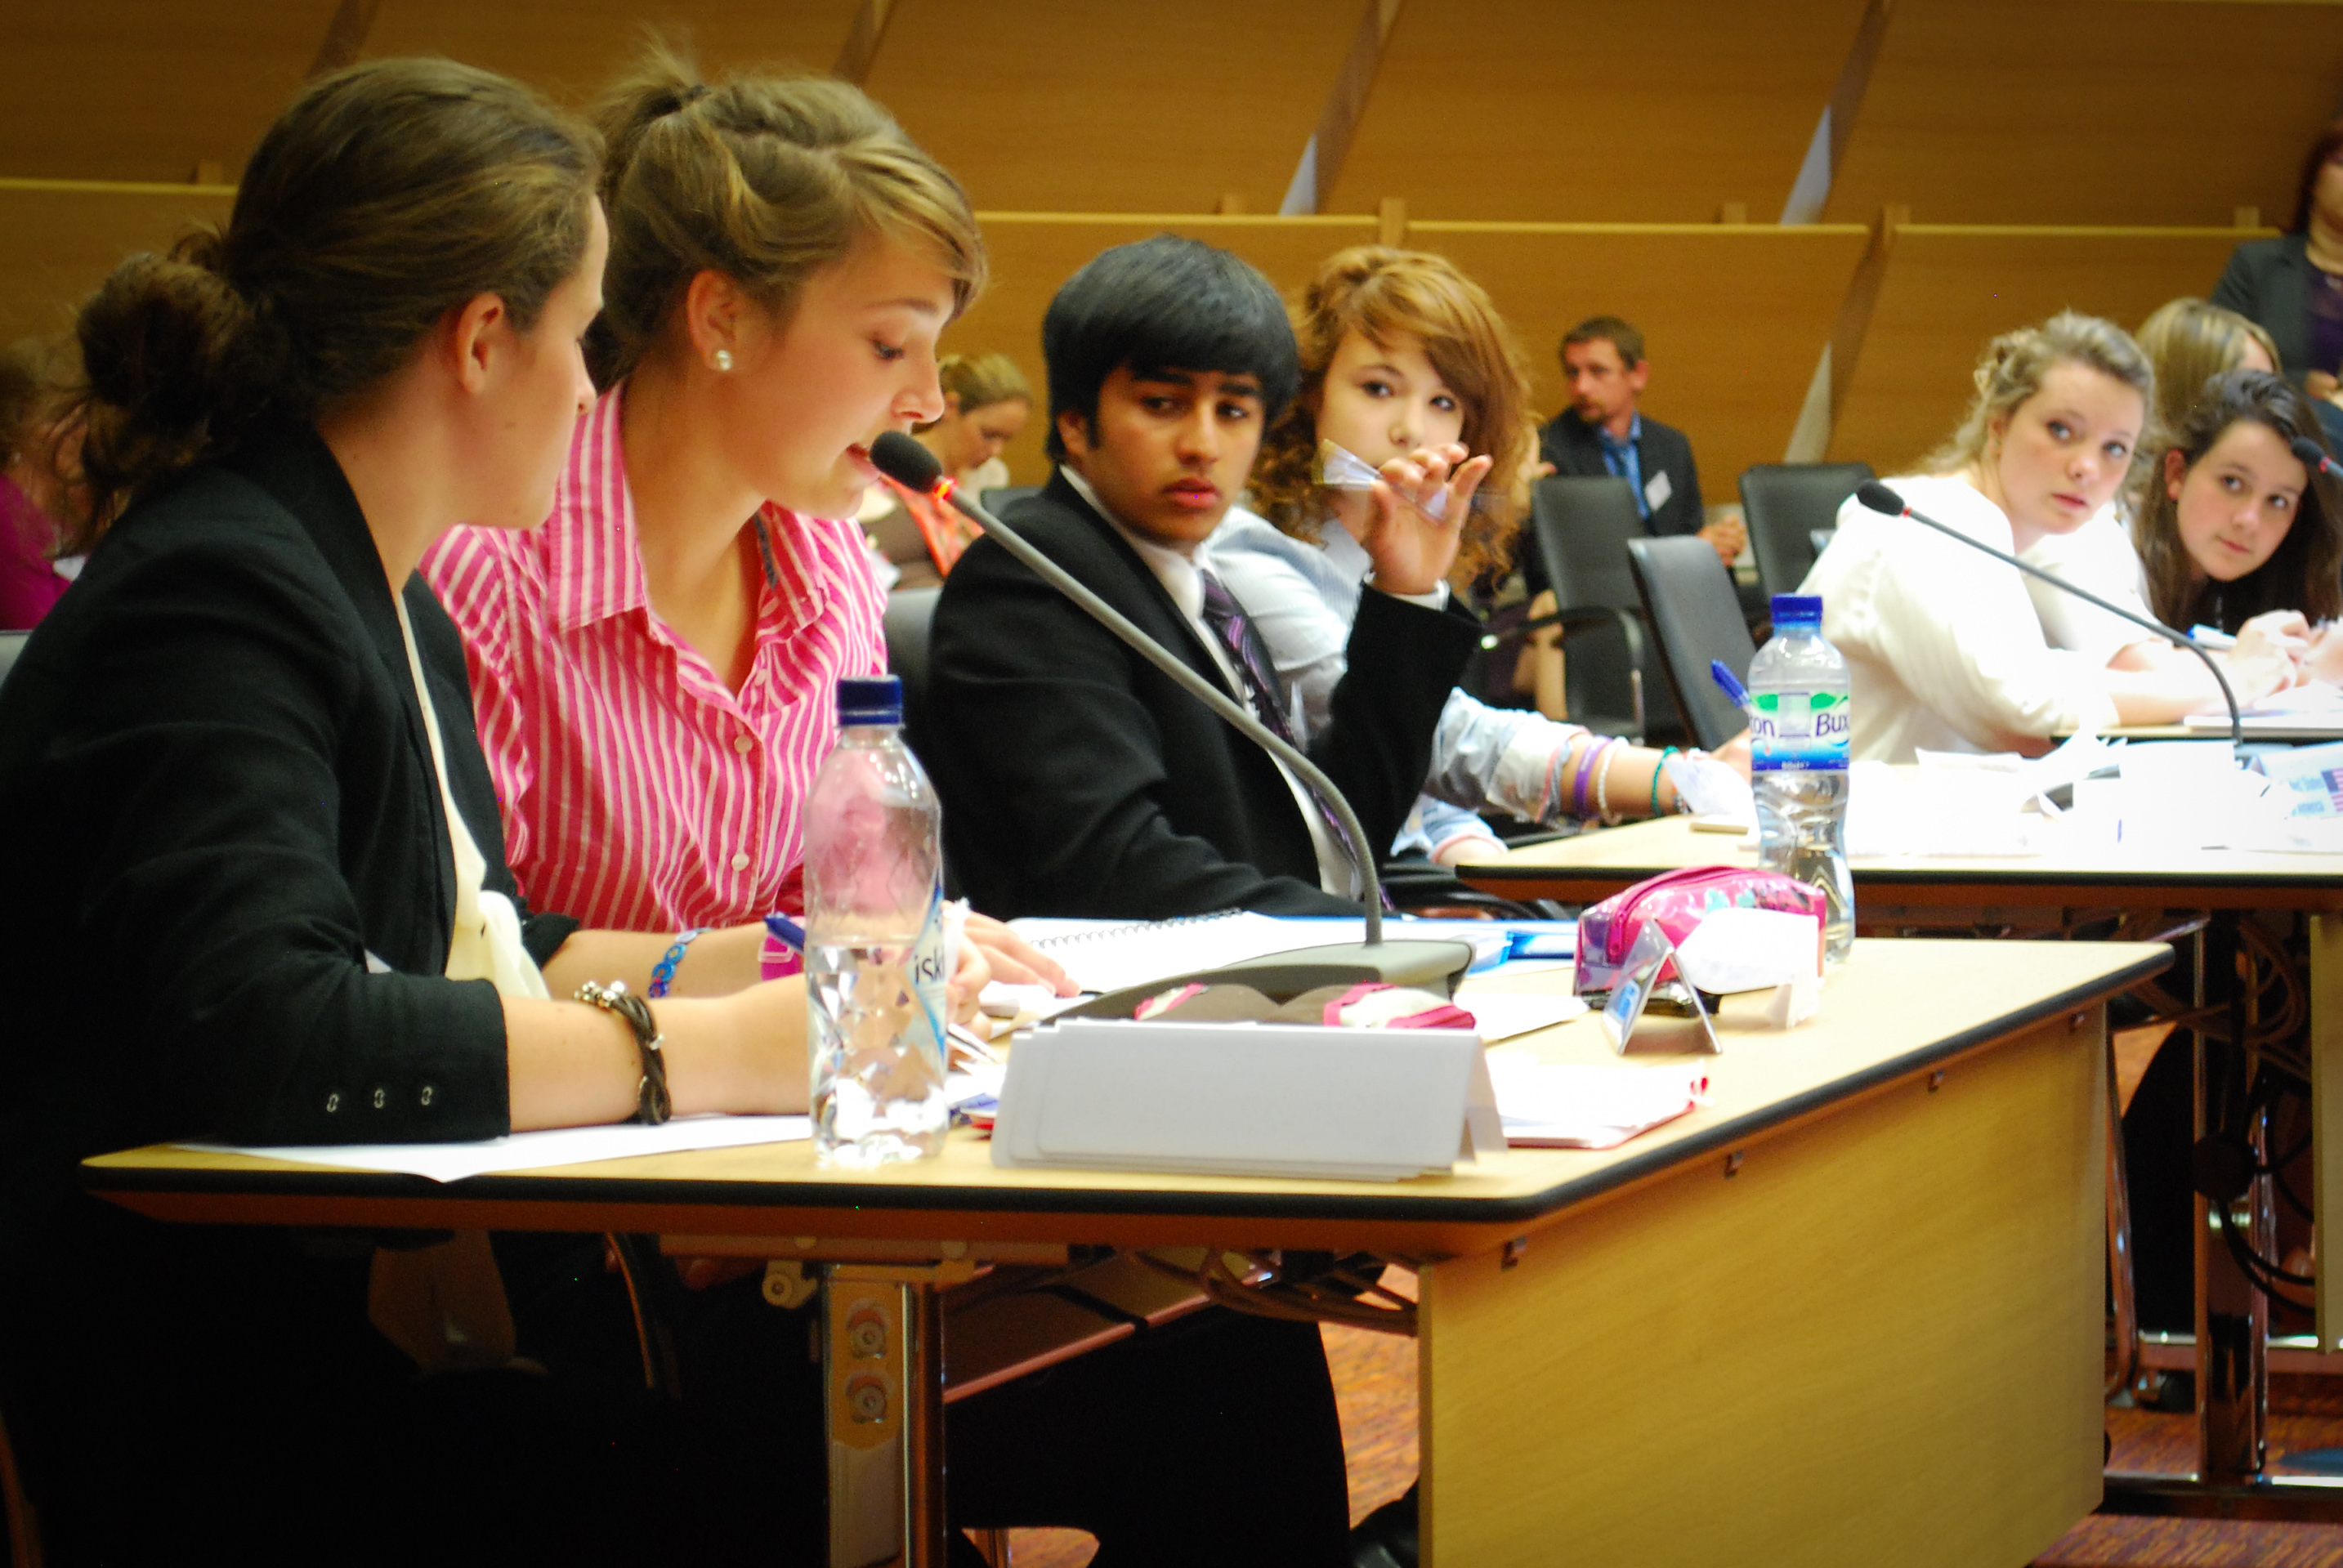 Debating and negotiating issues at a MUN conference